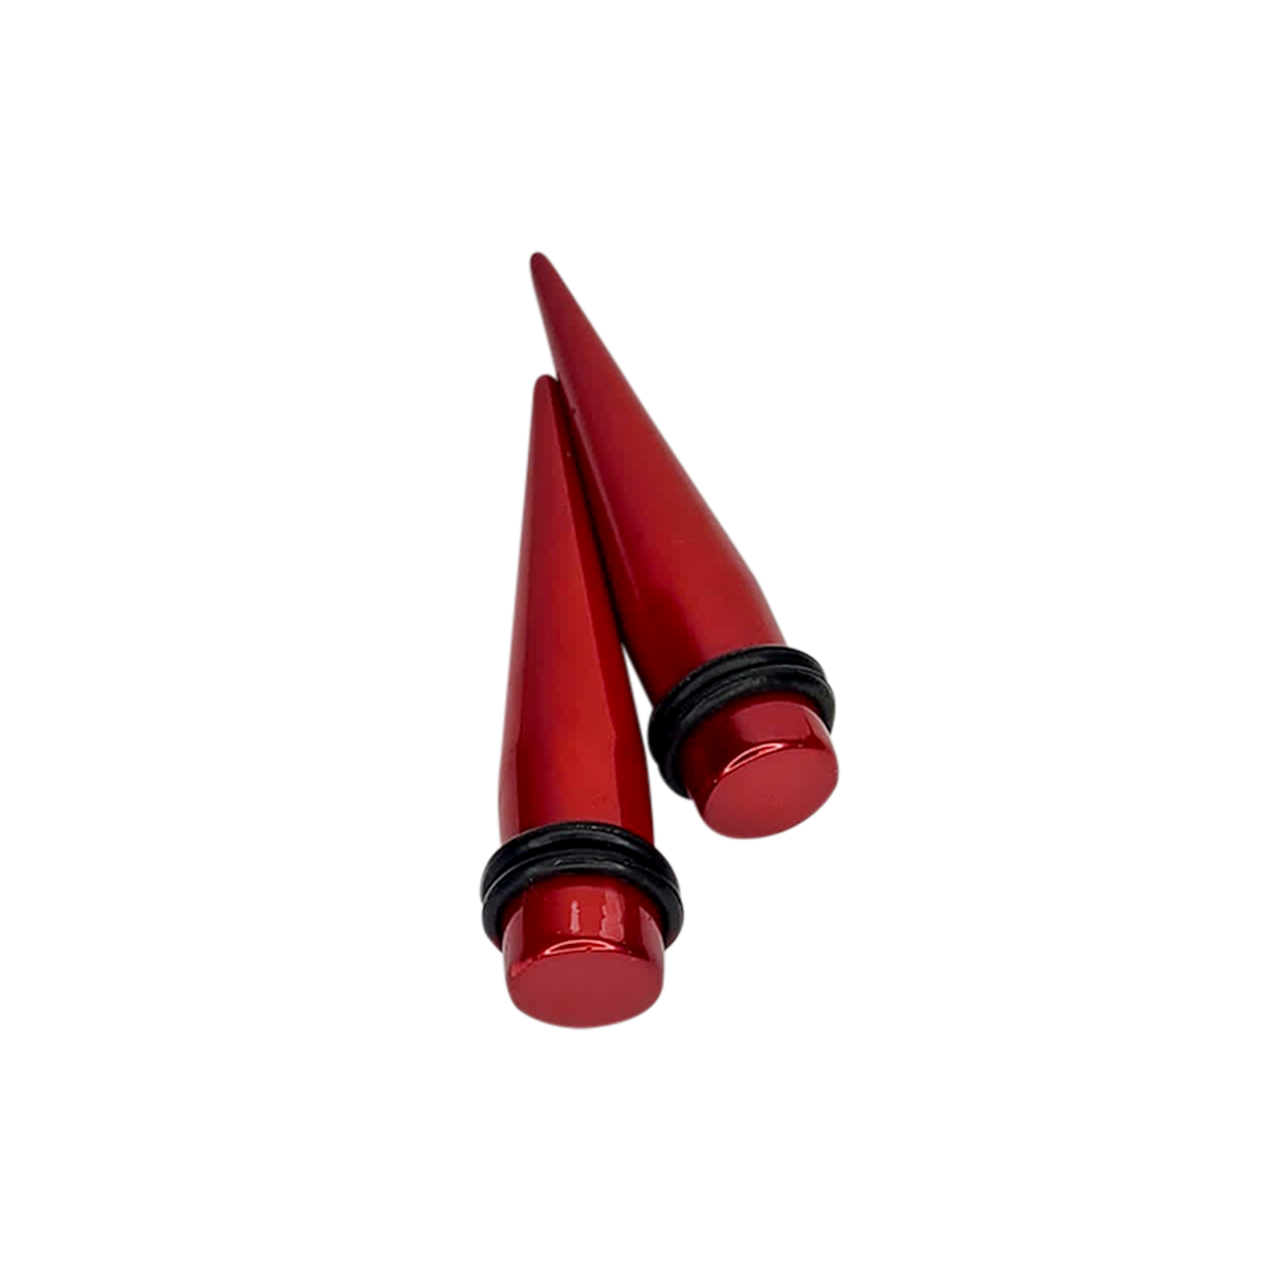 Metallic Cherry Red Acrylic O-ring Ear Tapers